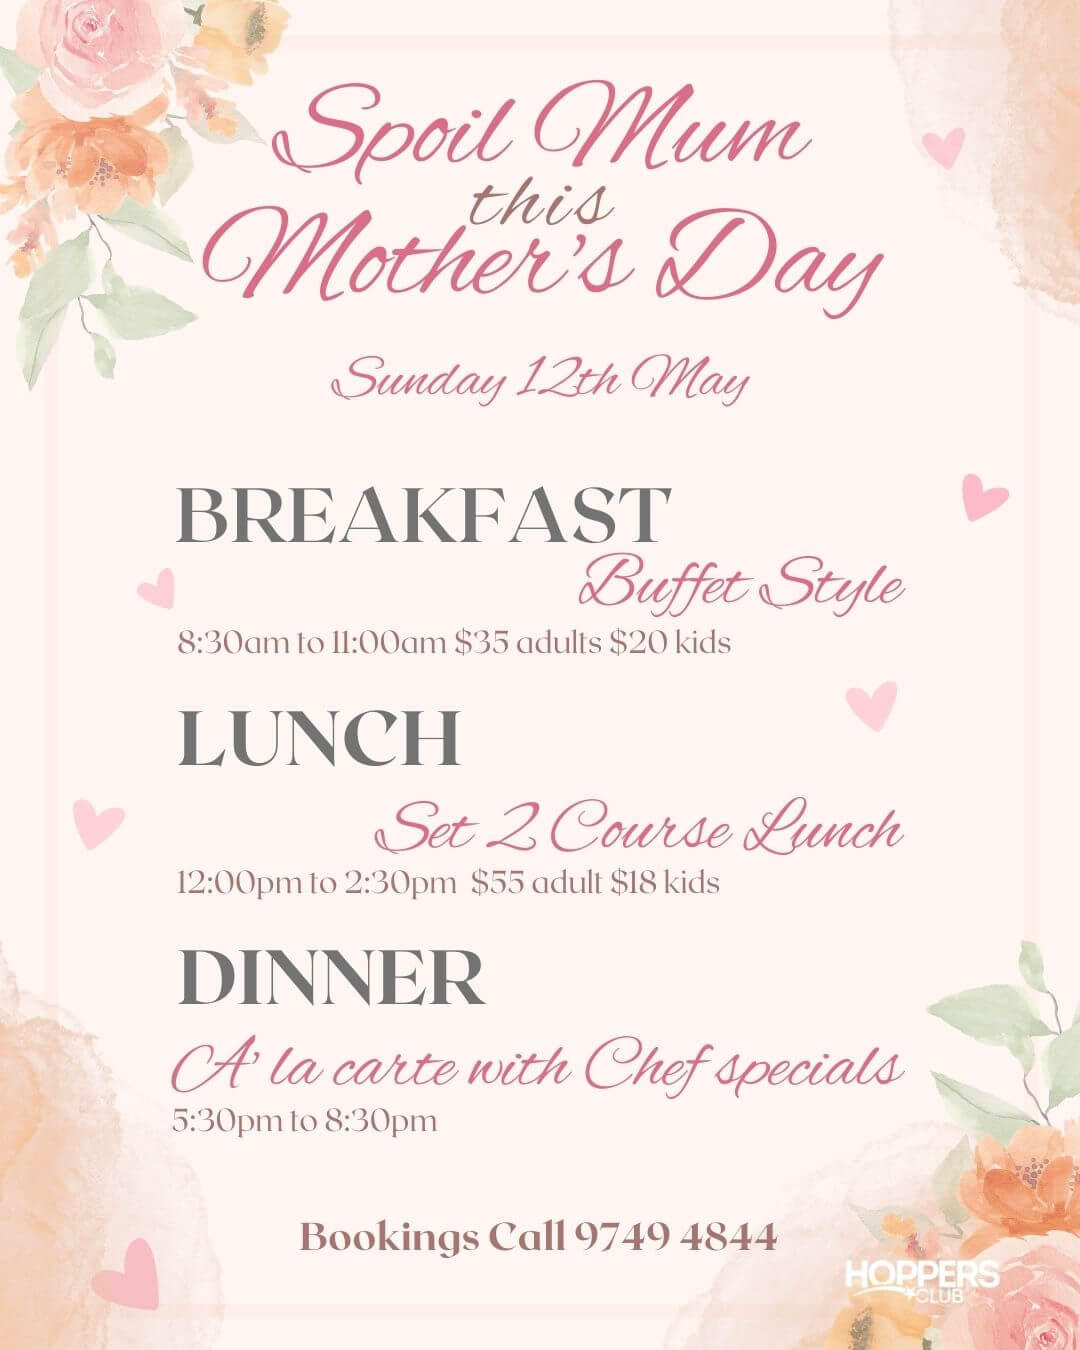 Bookings are essential. Call us today on 9749 4844 to secure your spot with Mum for Breakfast or Lunch.